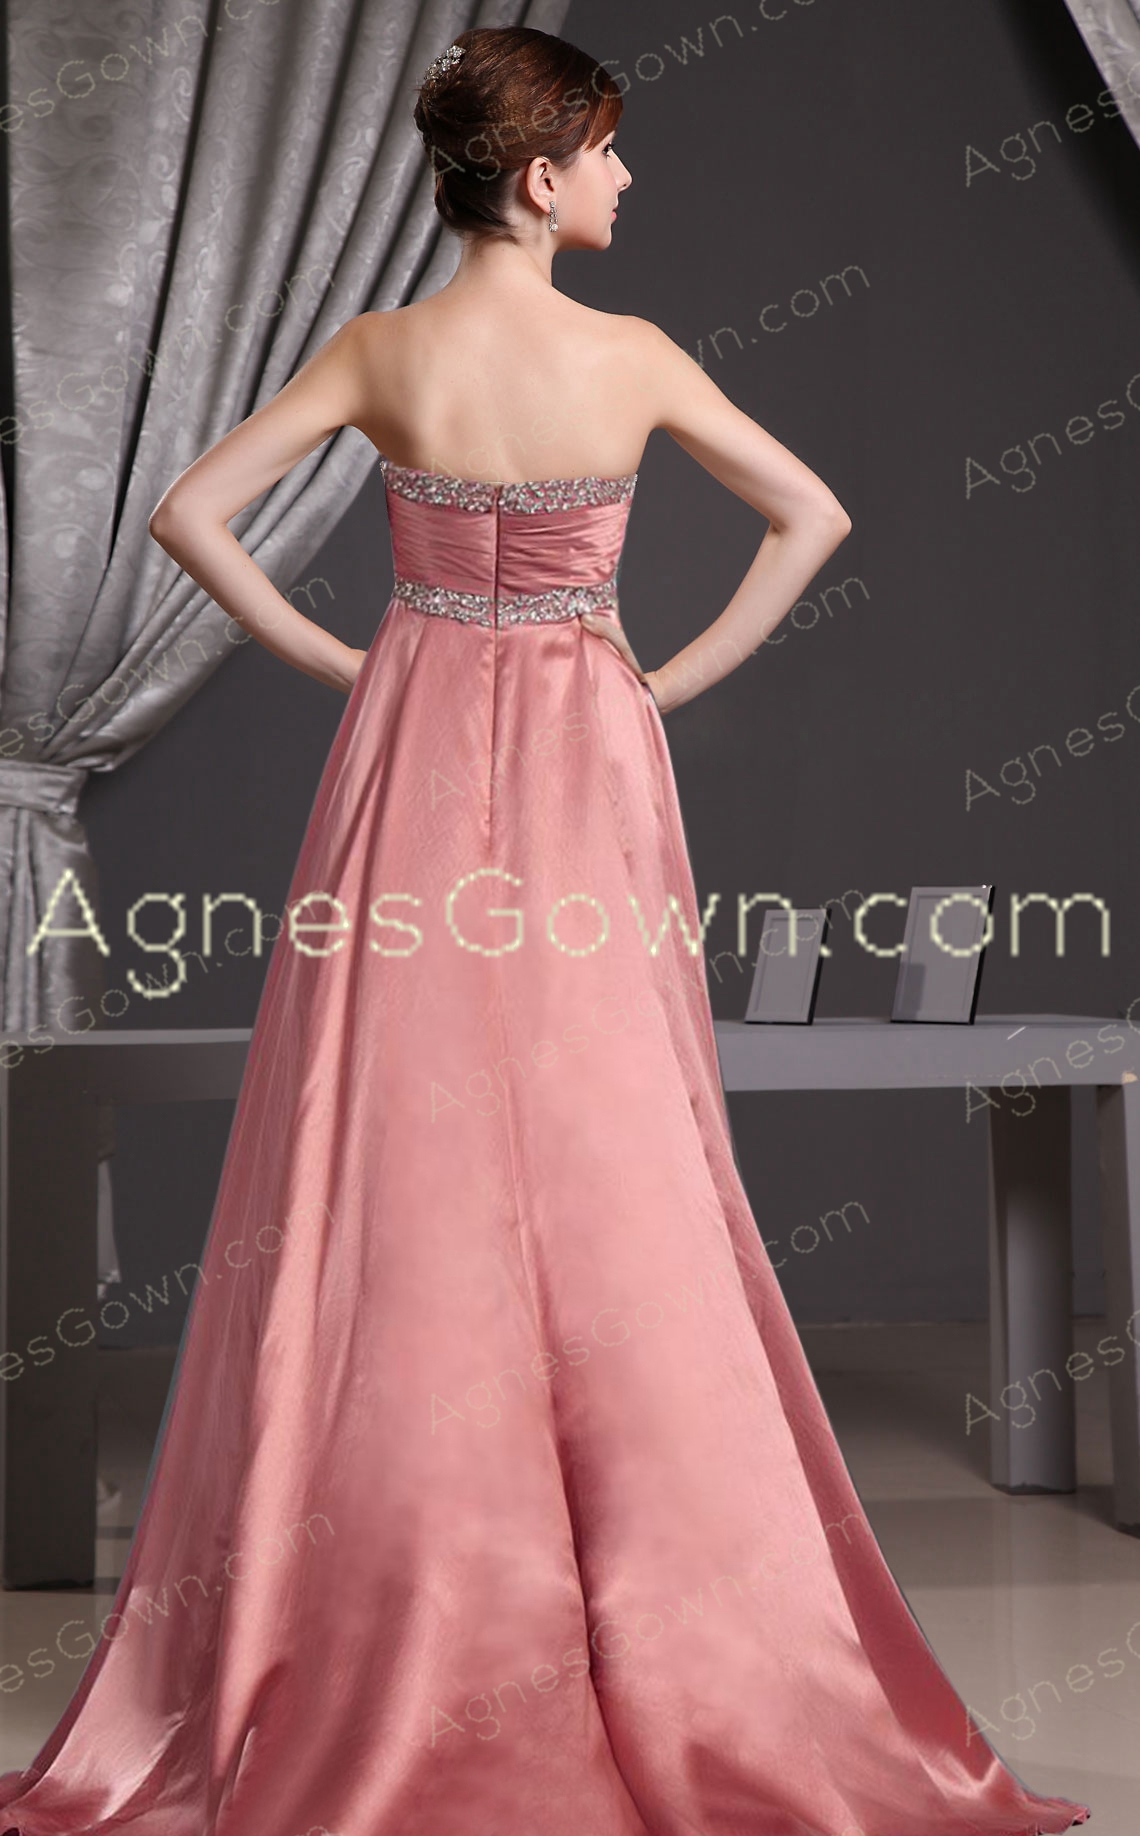 Exquisite Rustic Red Formal evening Dress With Ribbons